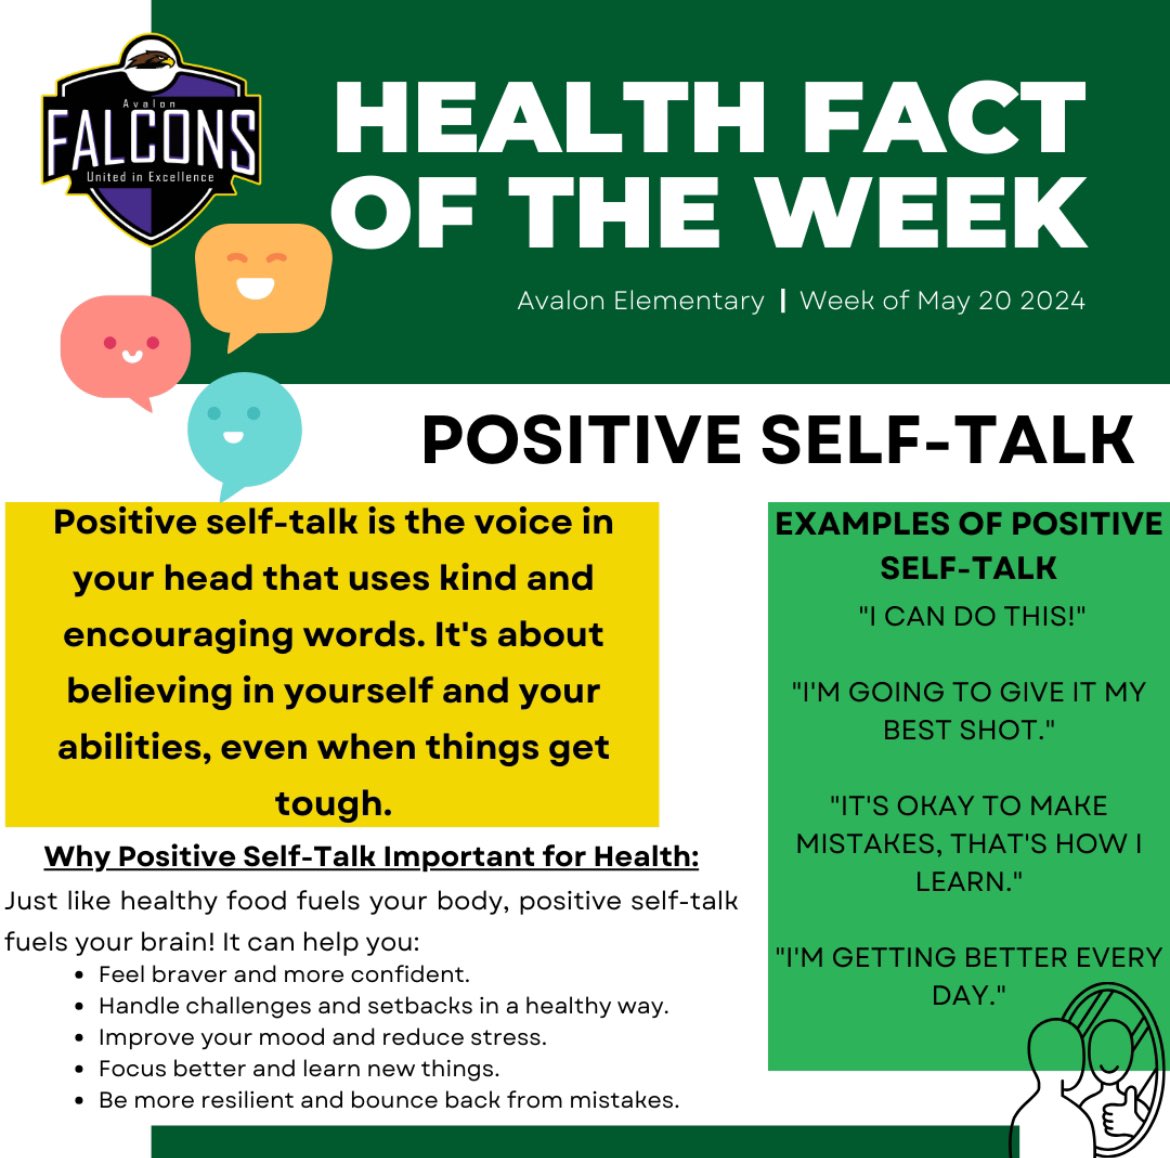 Health Fact of the Week: POSITIVE SELF TALK. Believing in yourself has many health benefits. See flyer for more info. #FalconsUnitedInExcellence #HealthFactoftheWeek2024